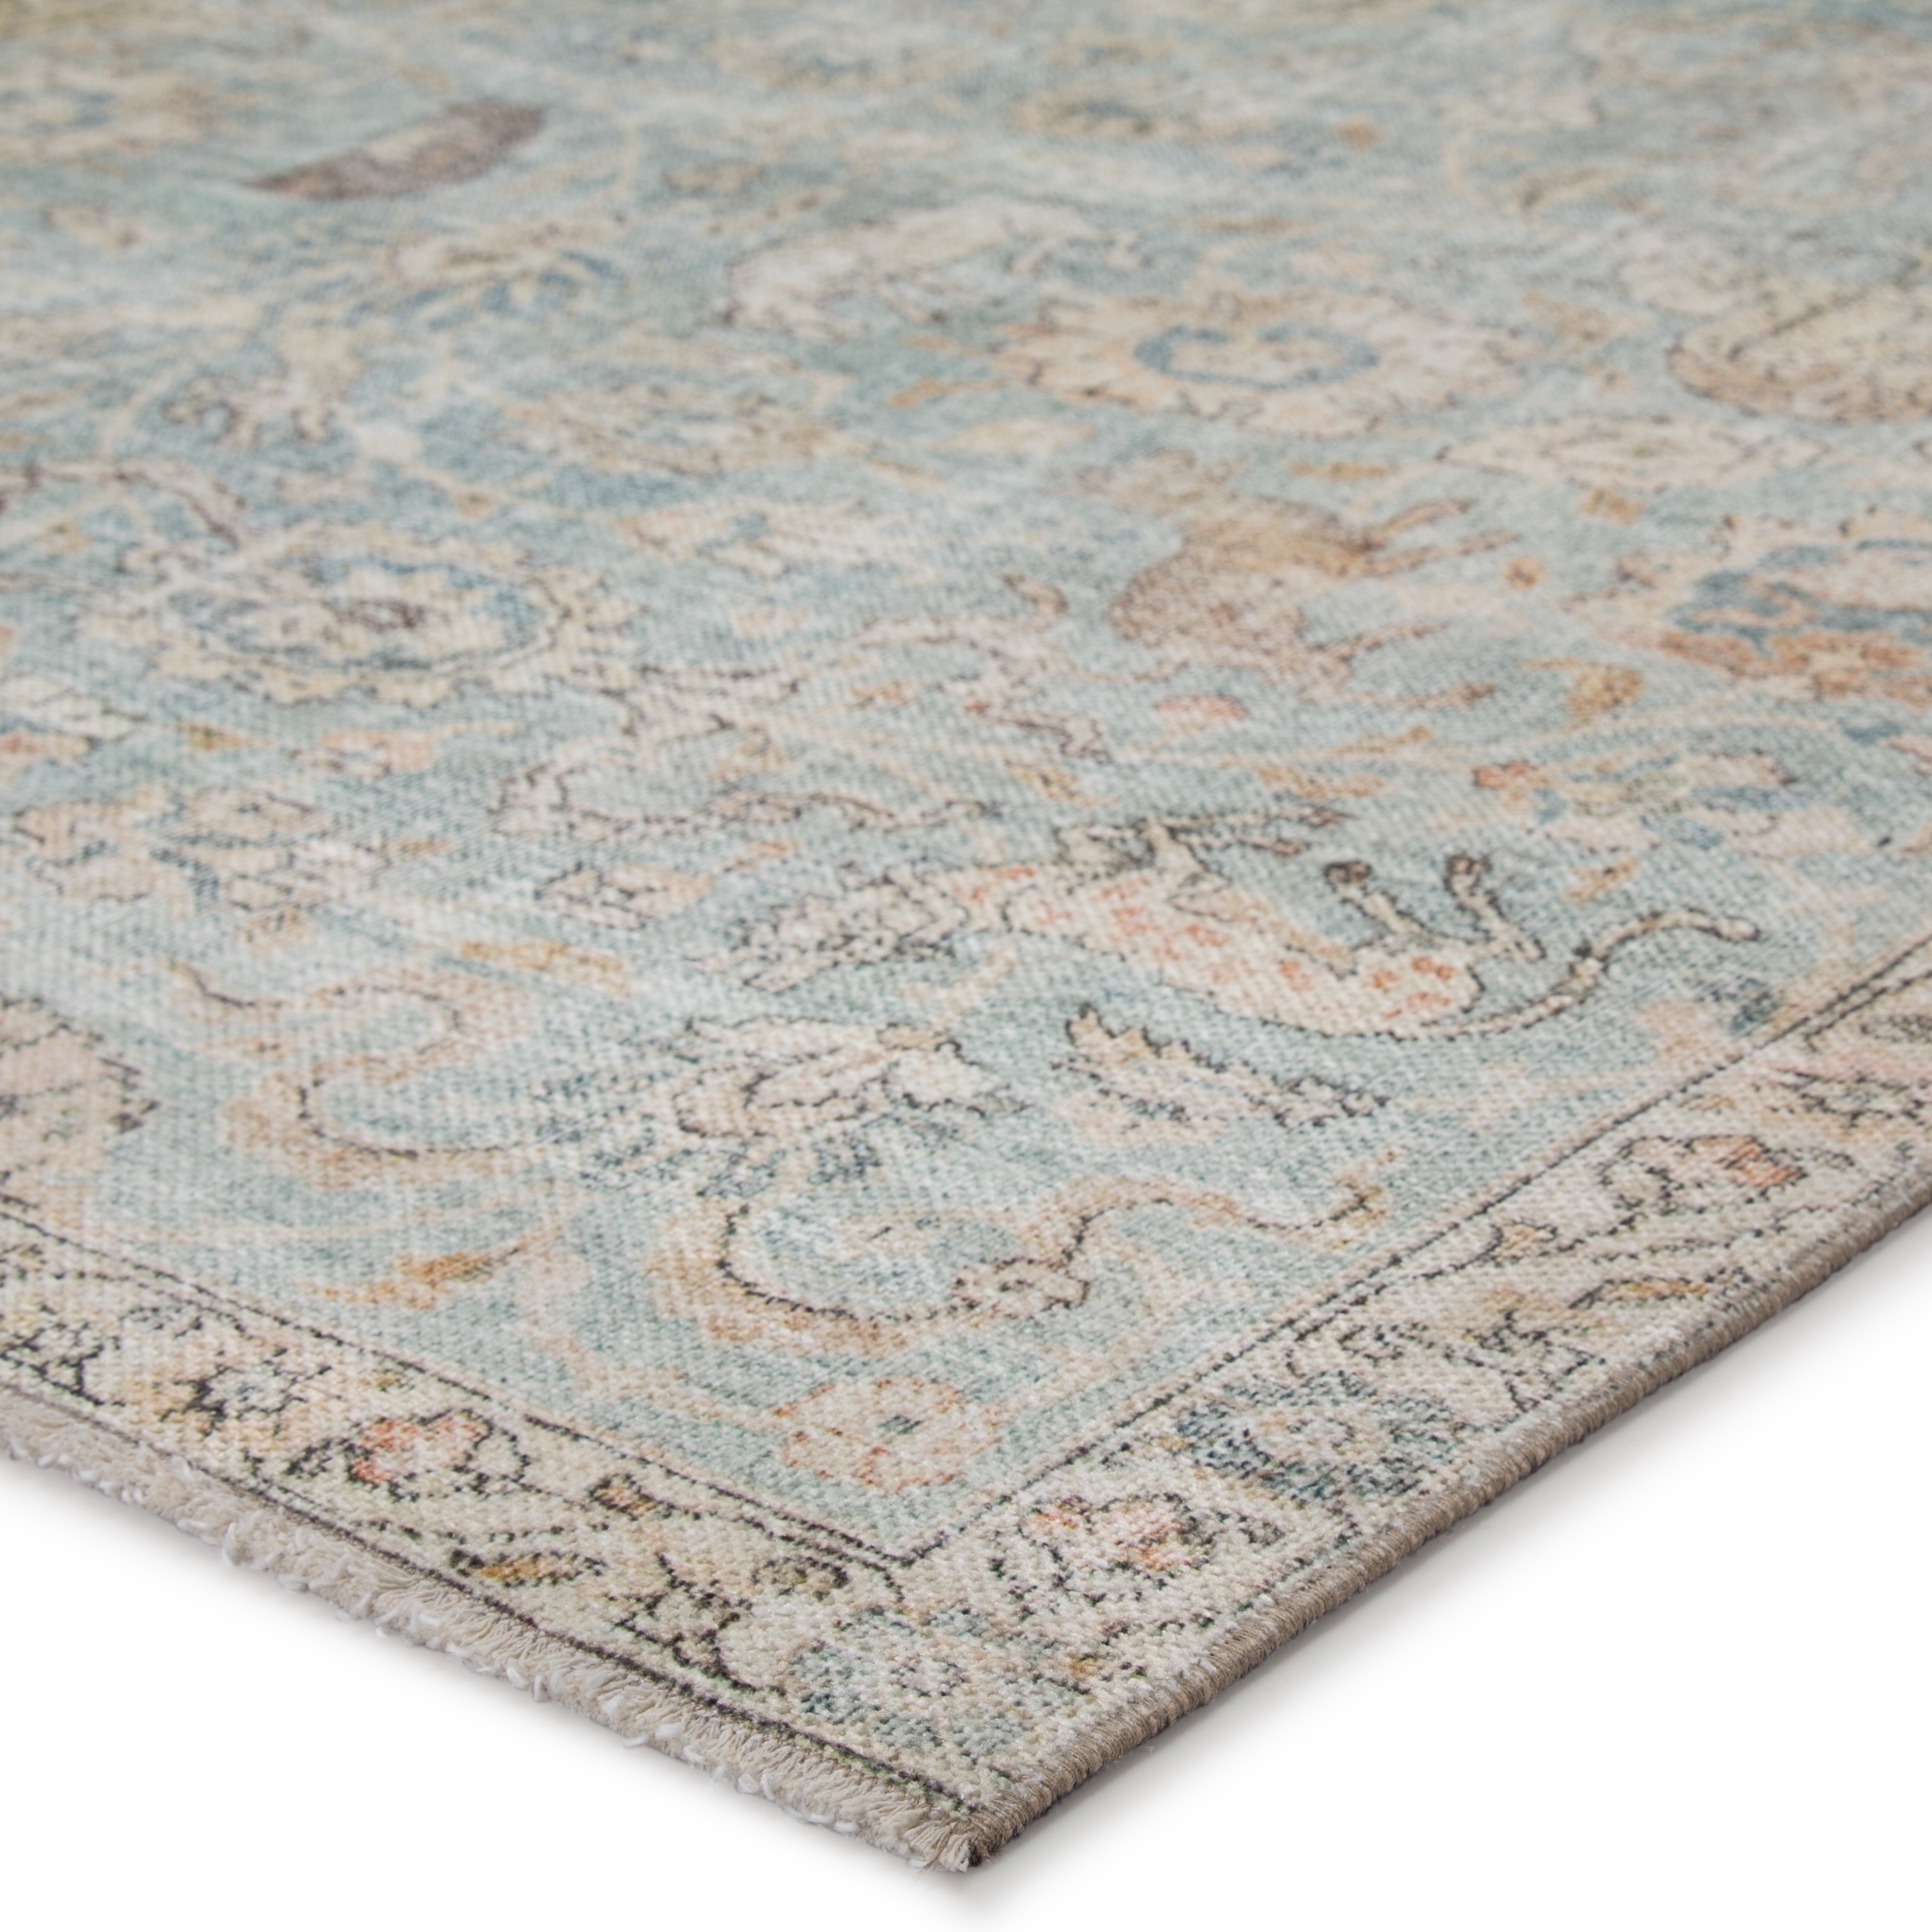 Stag Oriental Teal/ Gold Area Rug (8'10"X11'9") - Image 1